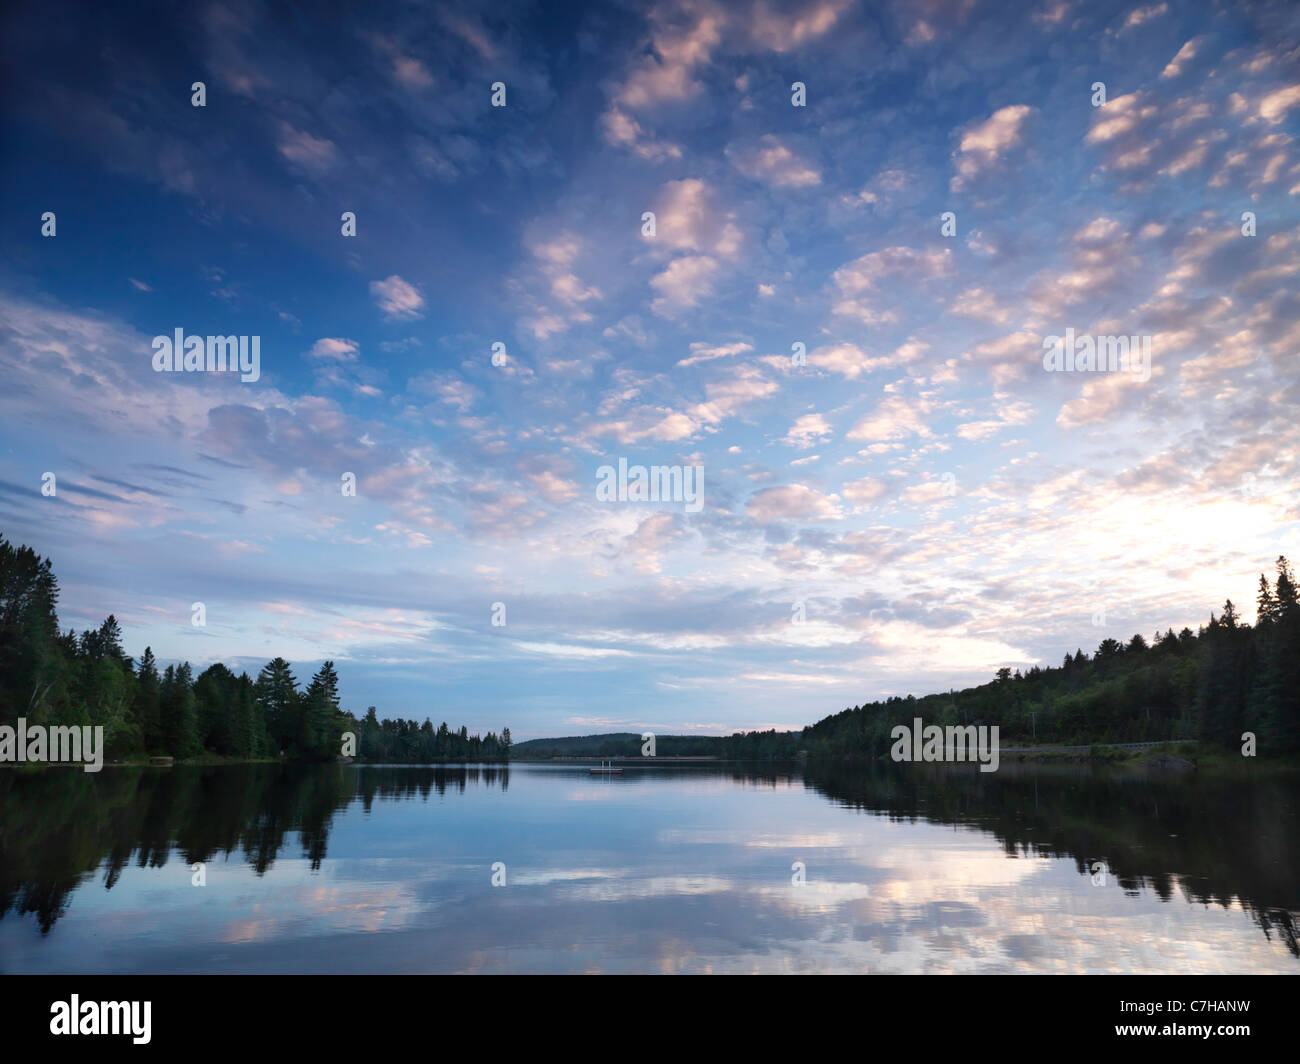 Algonquin Provincial Park summertime nature scenery of the Lake of Two Rivers at sunset. Ontario, Canada. Stock Photo